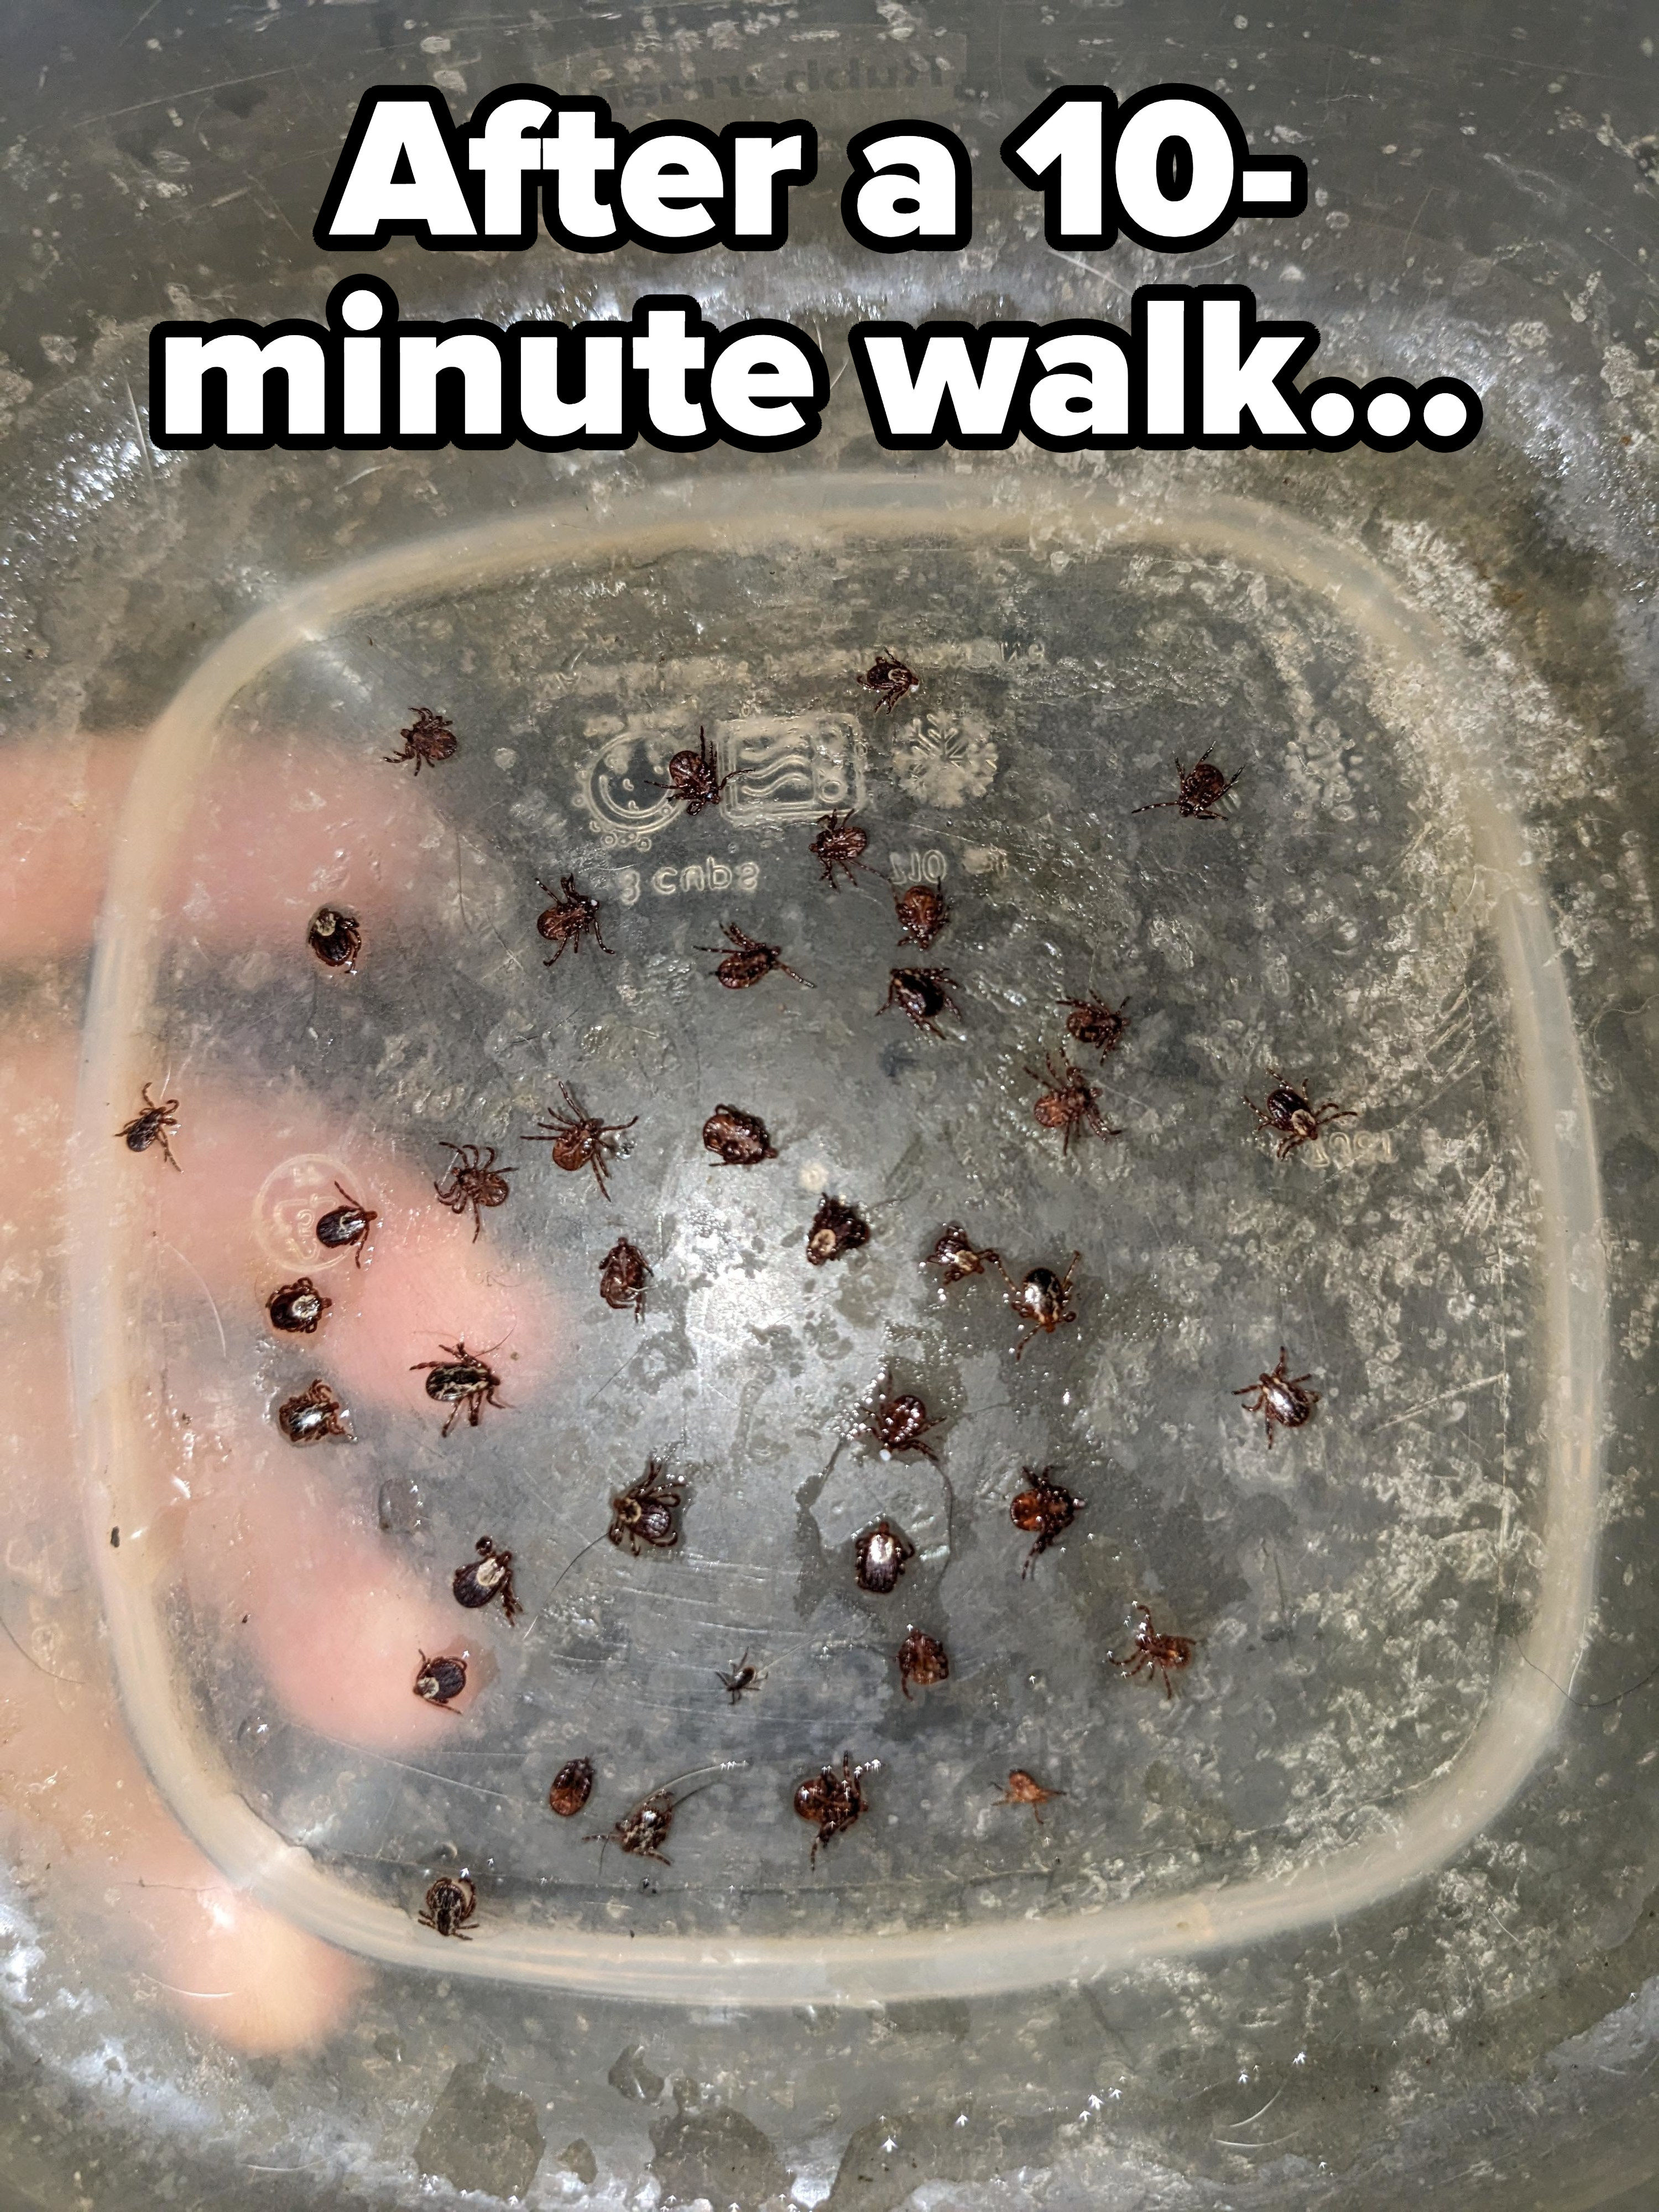 Person is covered in about 40 ticks after a 10-minute walk